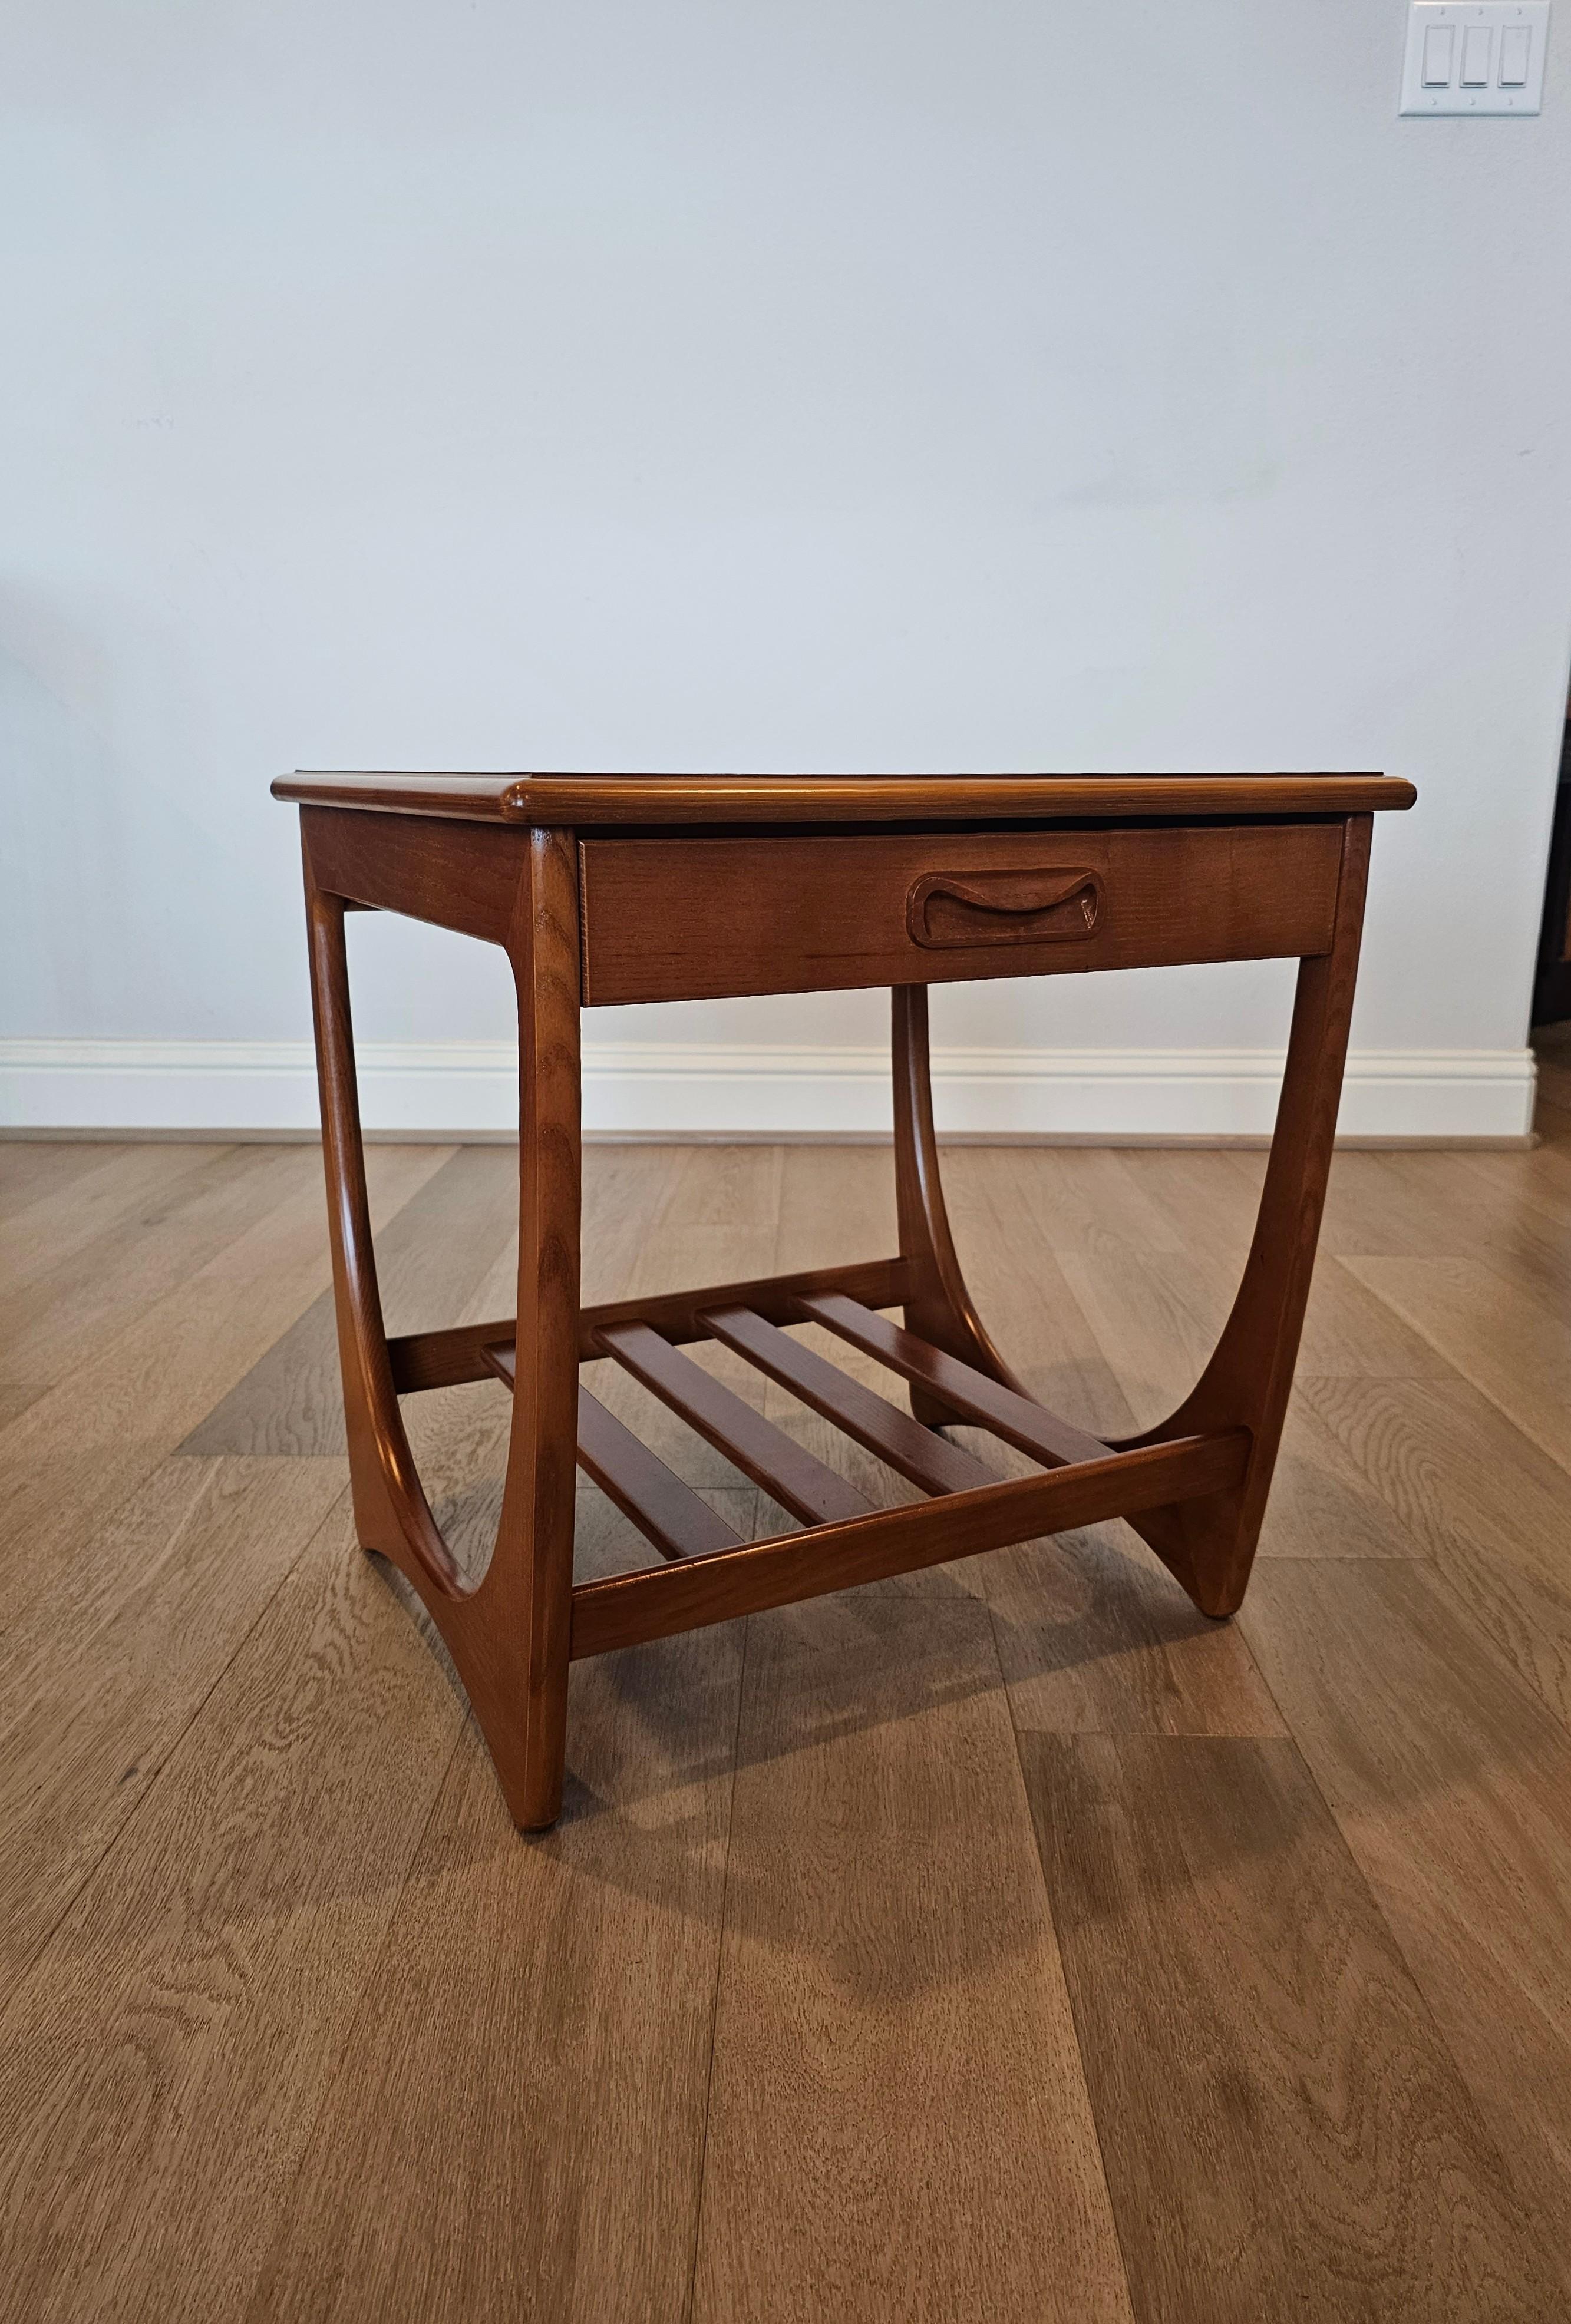 A fabulously retro G Plan mid-century modern Fresco teak side table, original vintage, circa late 1960s/1970s, England.

Introduced in 1966, the Fresco series was
designed by iconic mcm designer Victor Wilkins and features Danish Modern styling with